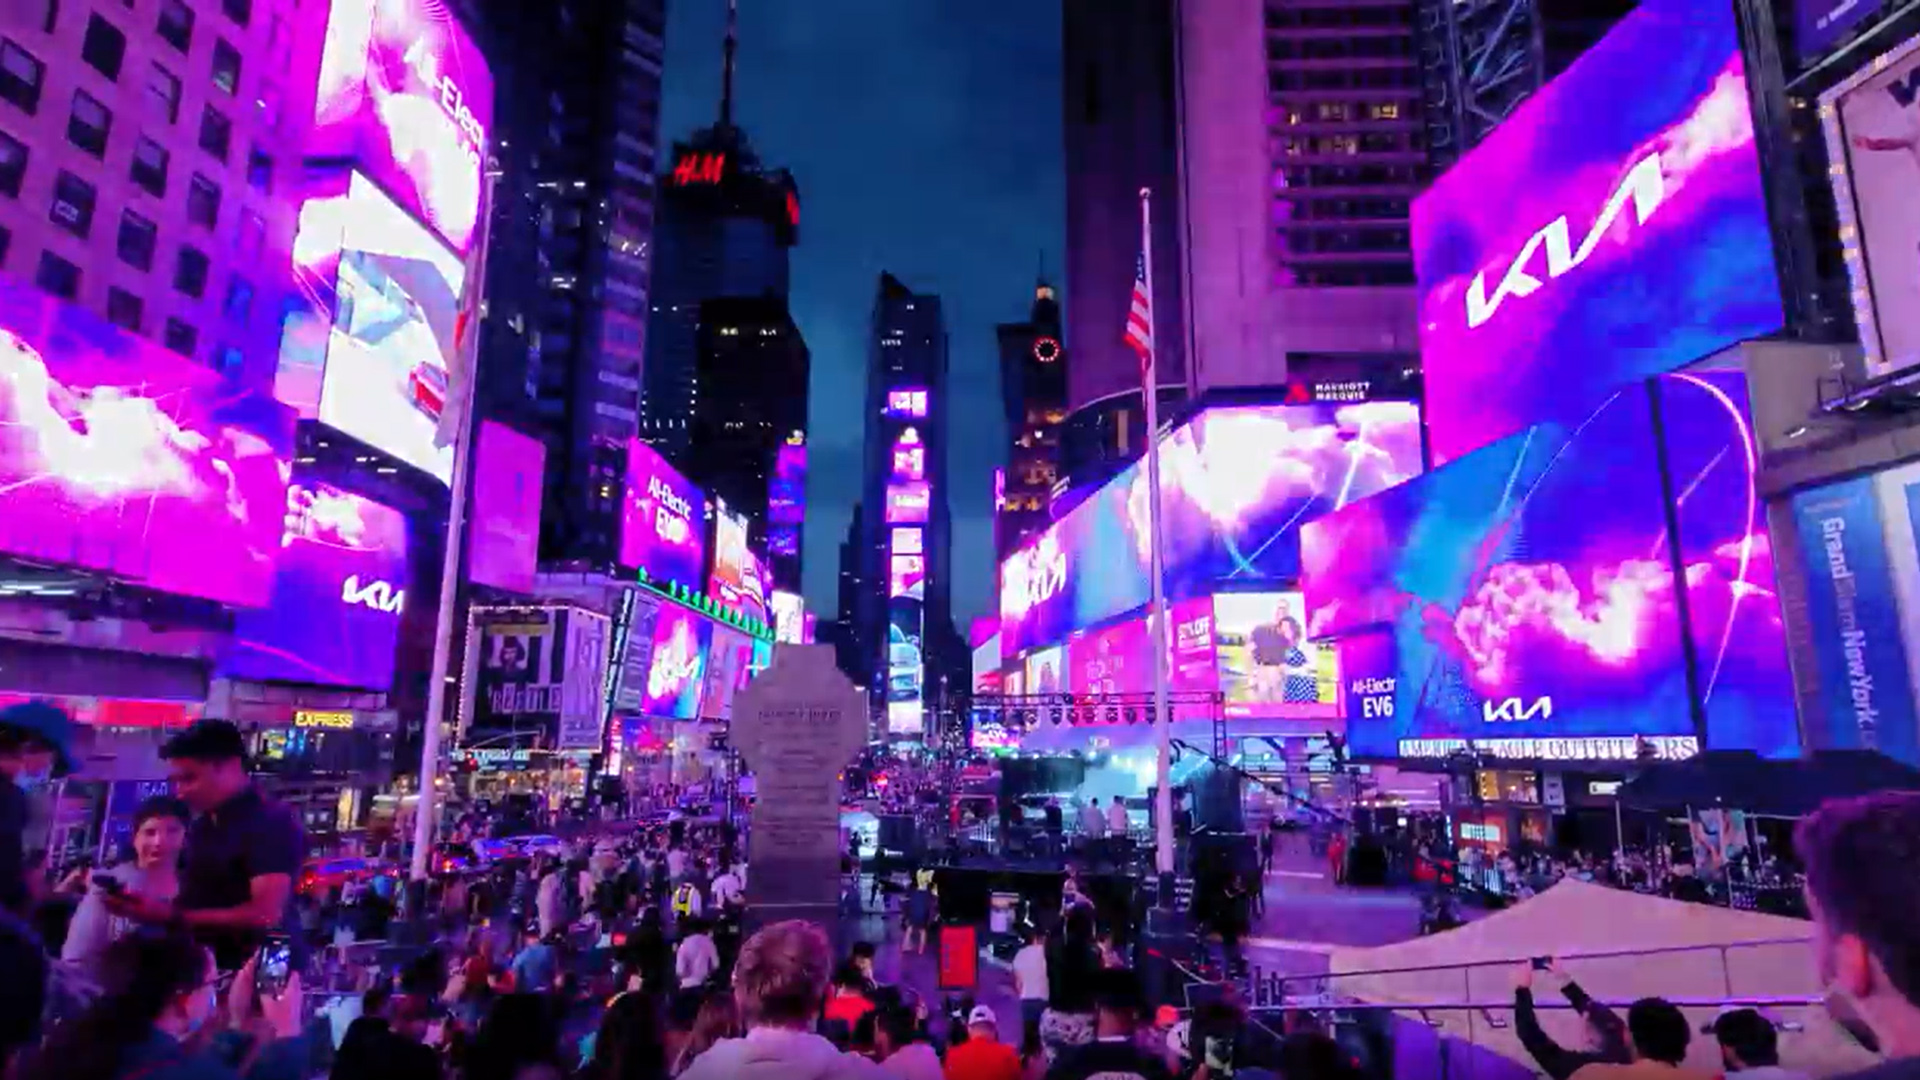 Image from Times Square Take-Over for Kia courtesy of Fivestone Studios